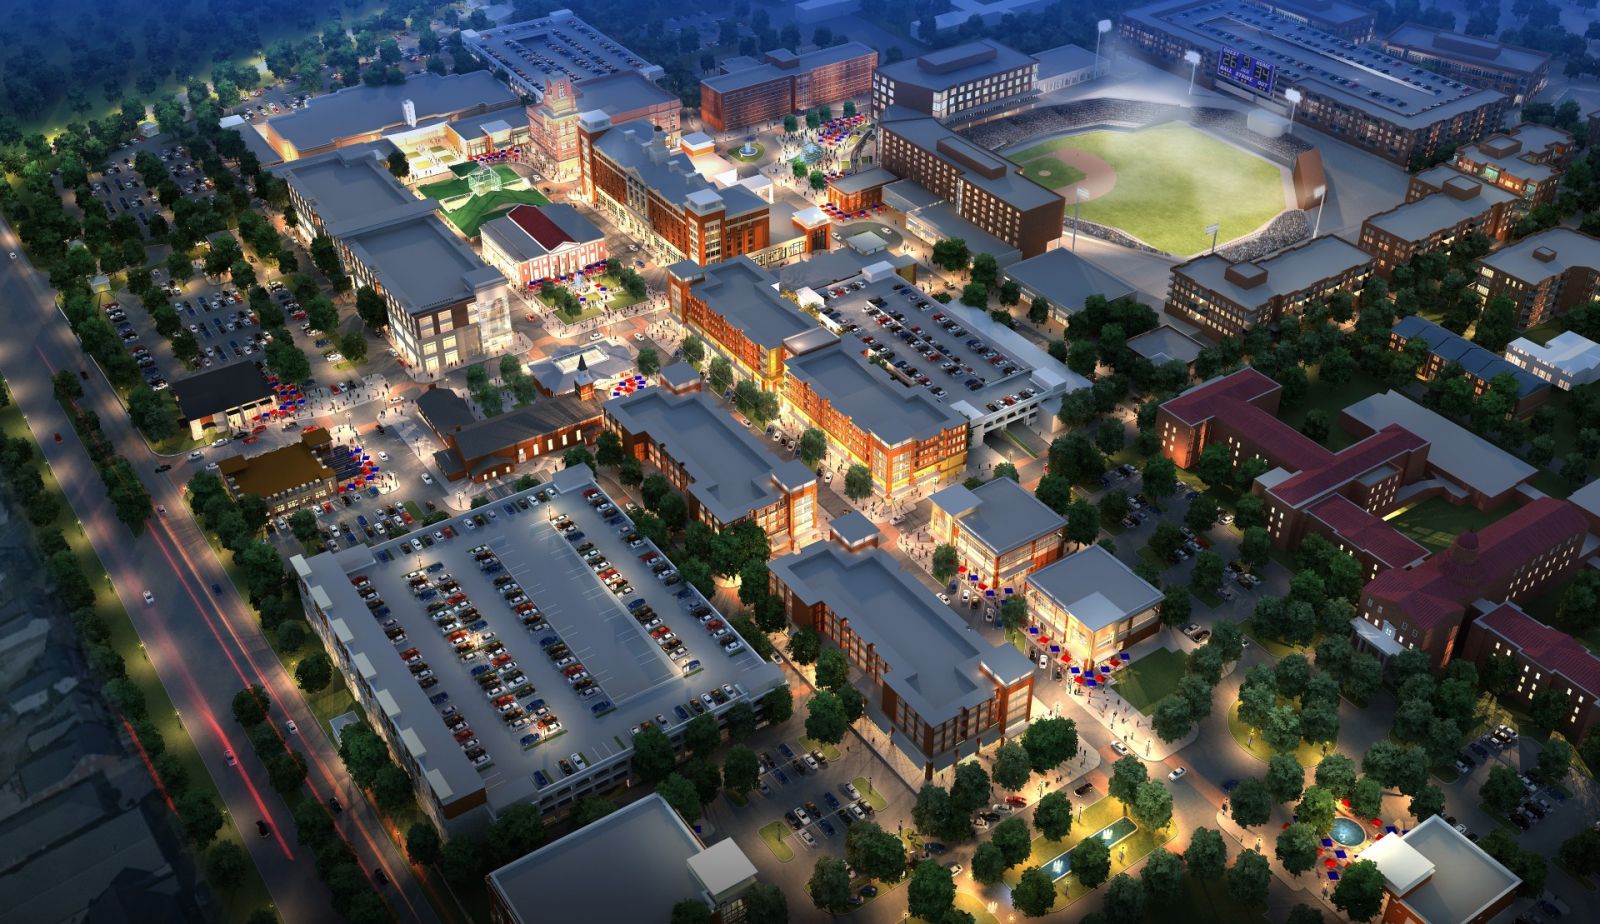 Several projects, including a planned new brewery and the relocation of the University of South Carolina's medical school, have picked up momentum at the 181-acre, mixed-use BullStreet District development. (Rendering/File)